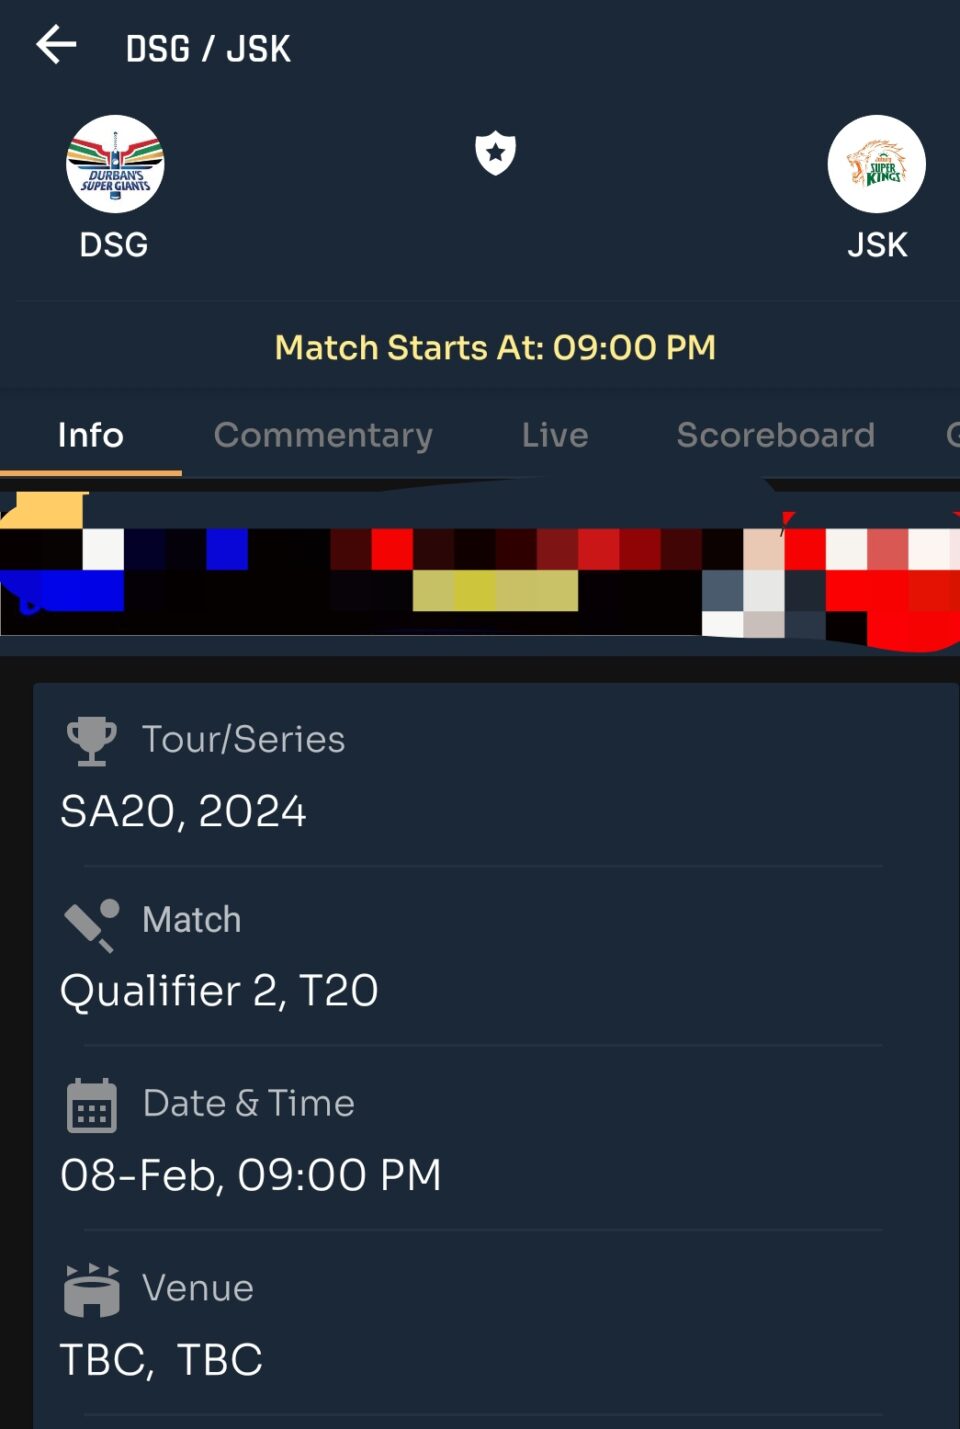 Today SA20 Qualifier 2 Match Prediction|JSK vsDSG Toss and Match Analysis | Pitch & Weather Report